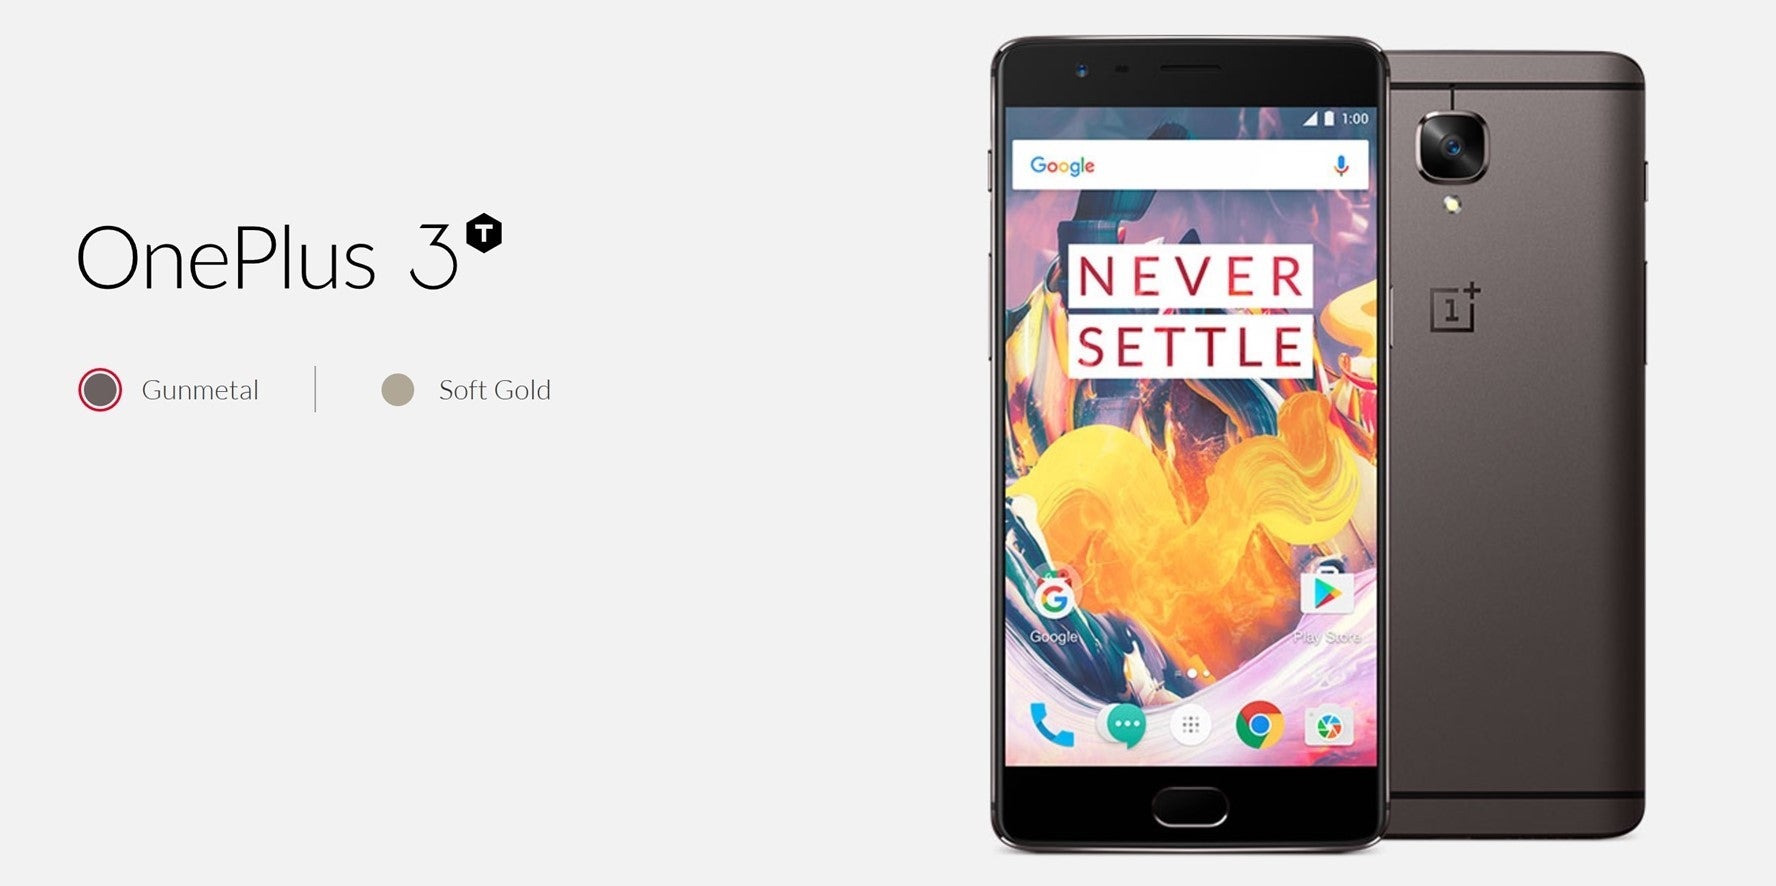 OnePlus 3T gets TWRP custom recovery soon after market launch